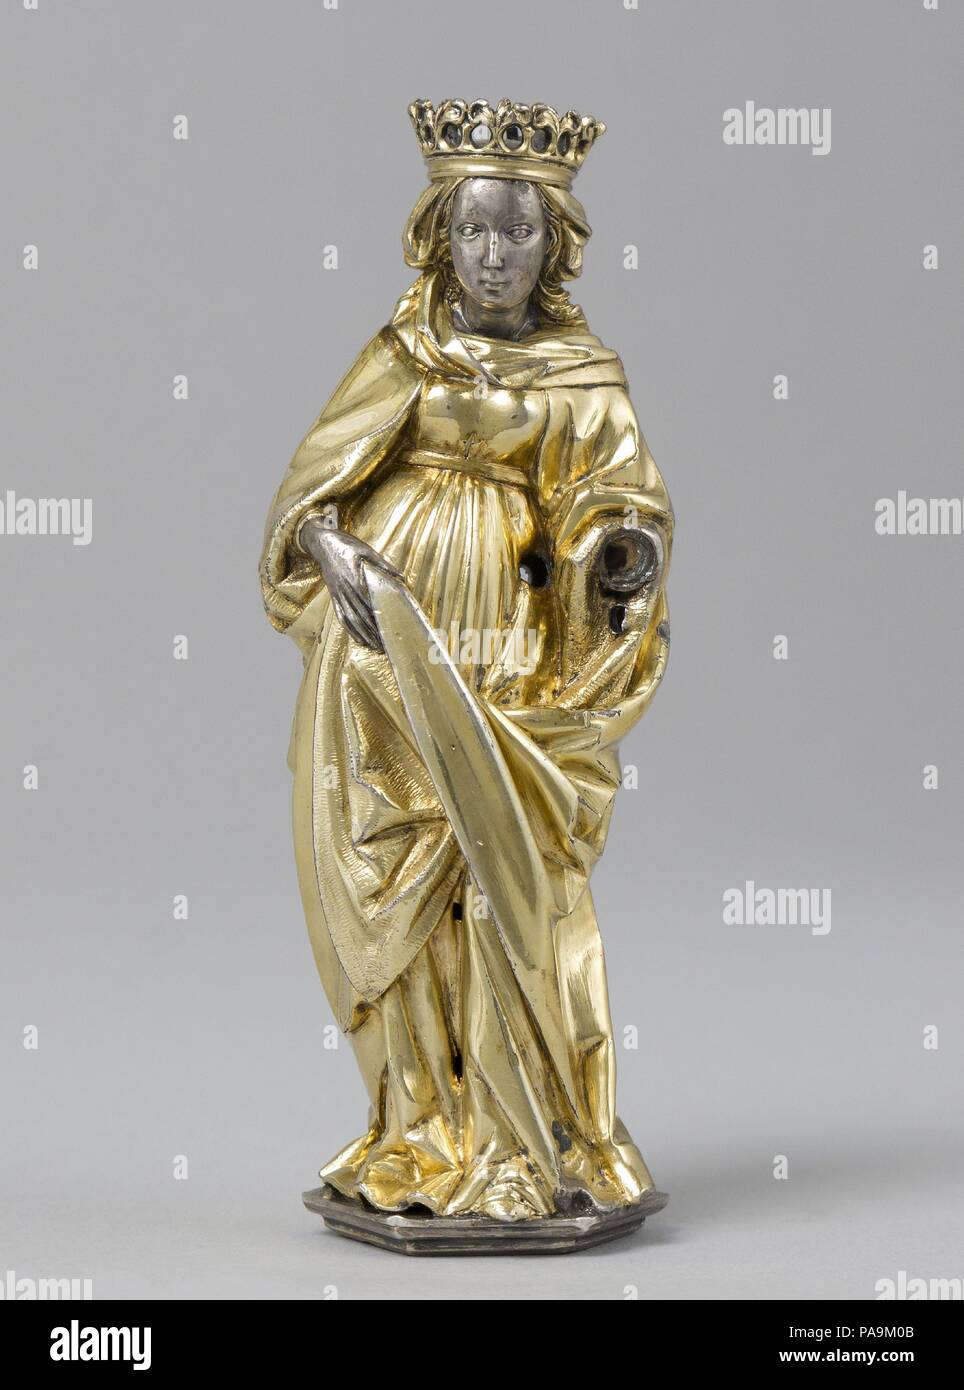 Standing Female Saint. Artist: Hans von Reutlingen (German, Aachen, 1465-1547) or Workshop. Culture: German. Dimensions: Overall: 3 3/4 x 1 5/16 x 1 1/4in. (9.5 x 3.4 x 3.1cm). Date: ca. 1510.  This finely worked figure appears to have come from the immense bust reliquary of Saint Lambert commissioned by the prince-bishop Erard de La Marck for the now-destroyed cathedral of Saint Lambert in Liège. Created by the Aachen goldsmith Hans von Reutlingen and his workshop beginning in 1508, it was consecrated on April 22, 1512. The left hand of the crowned female figure is also missing, together with Stock Photo